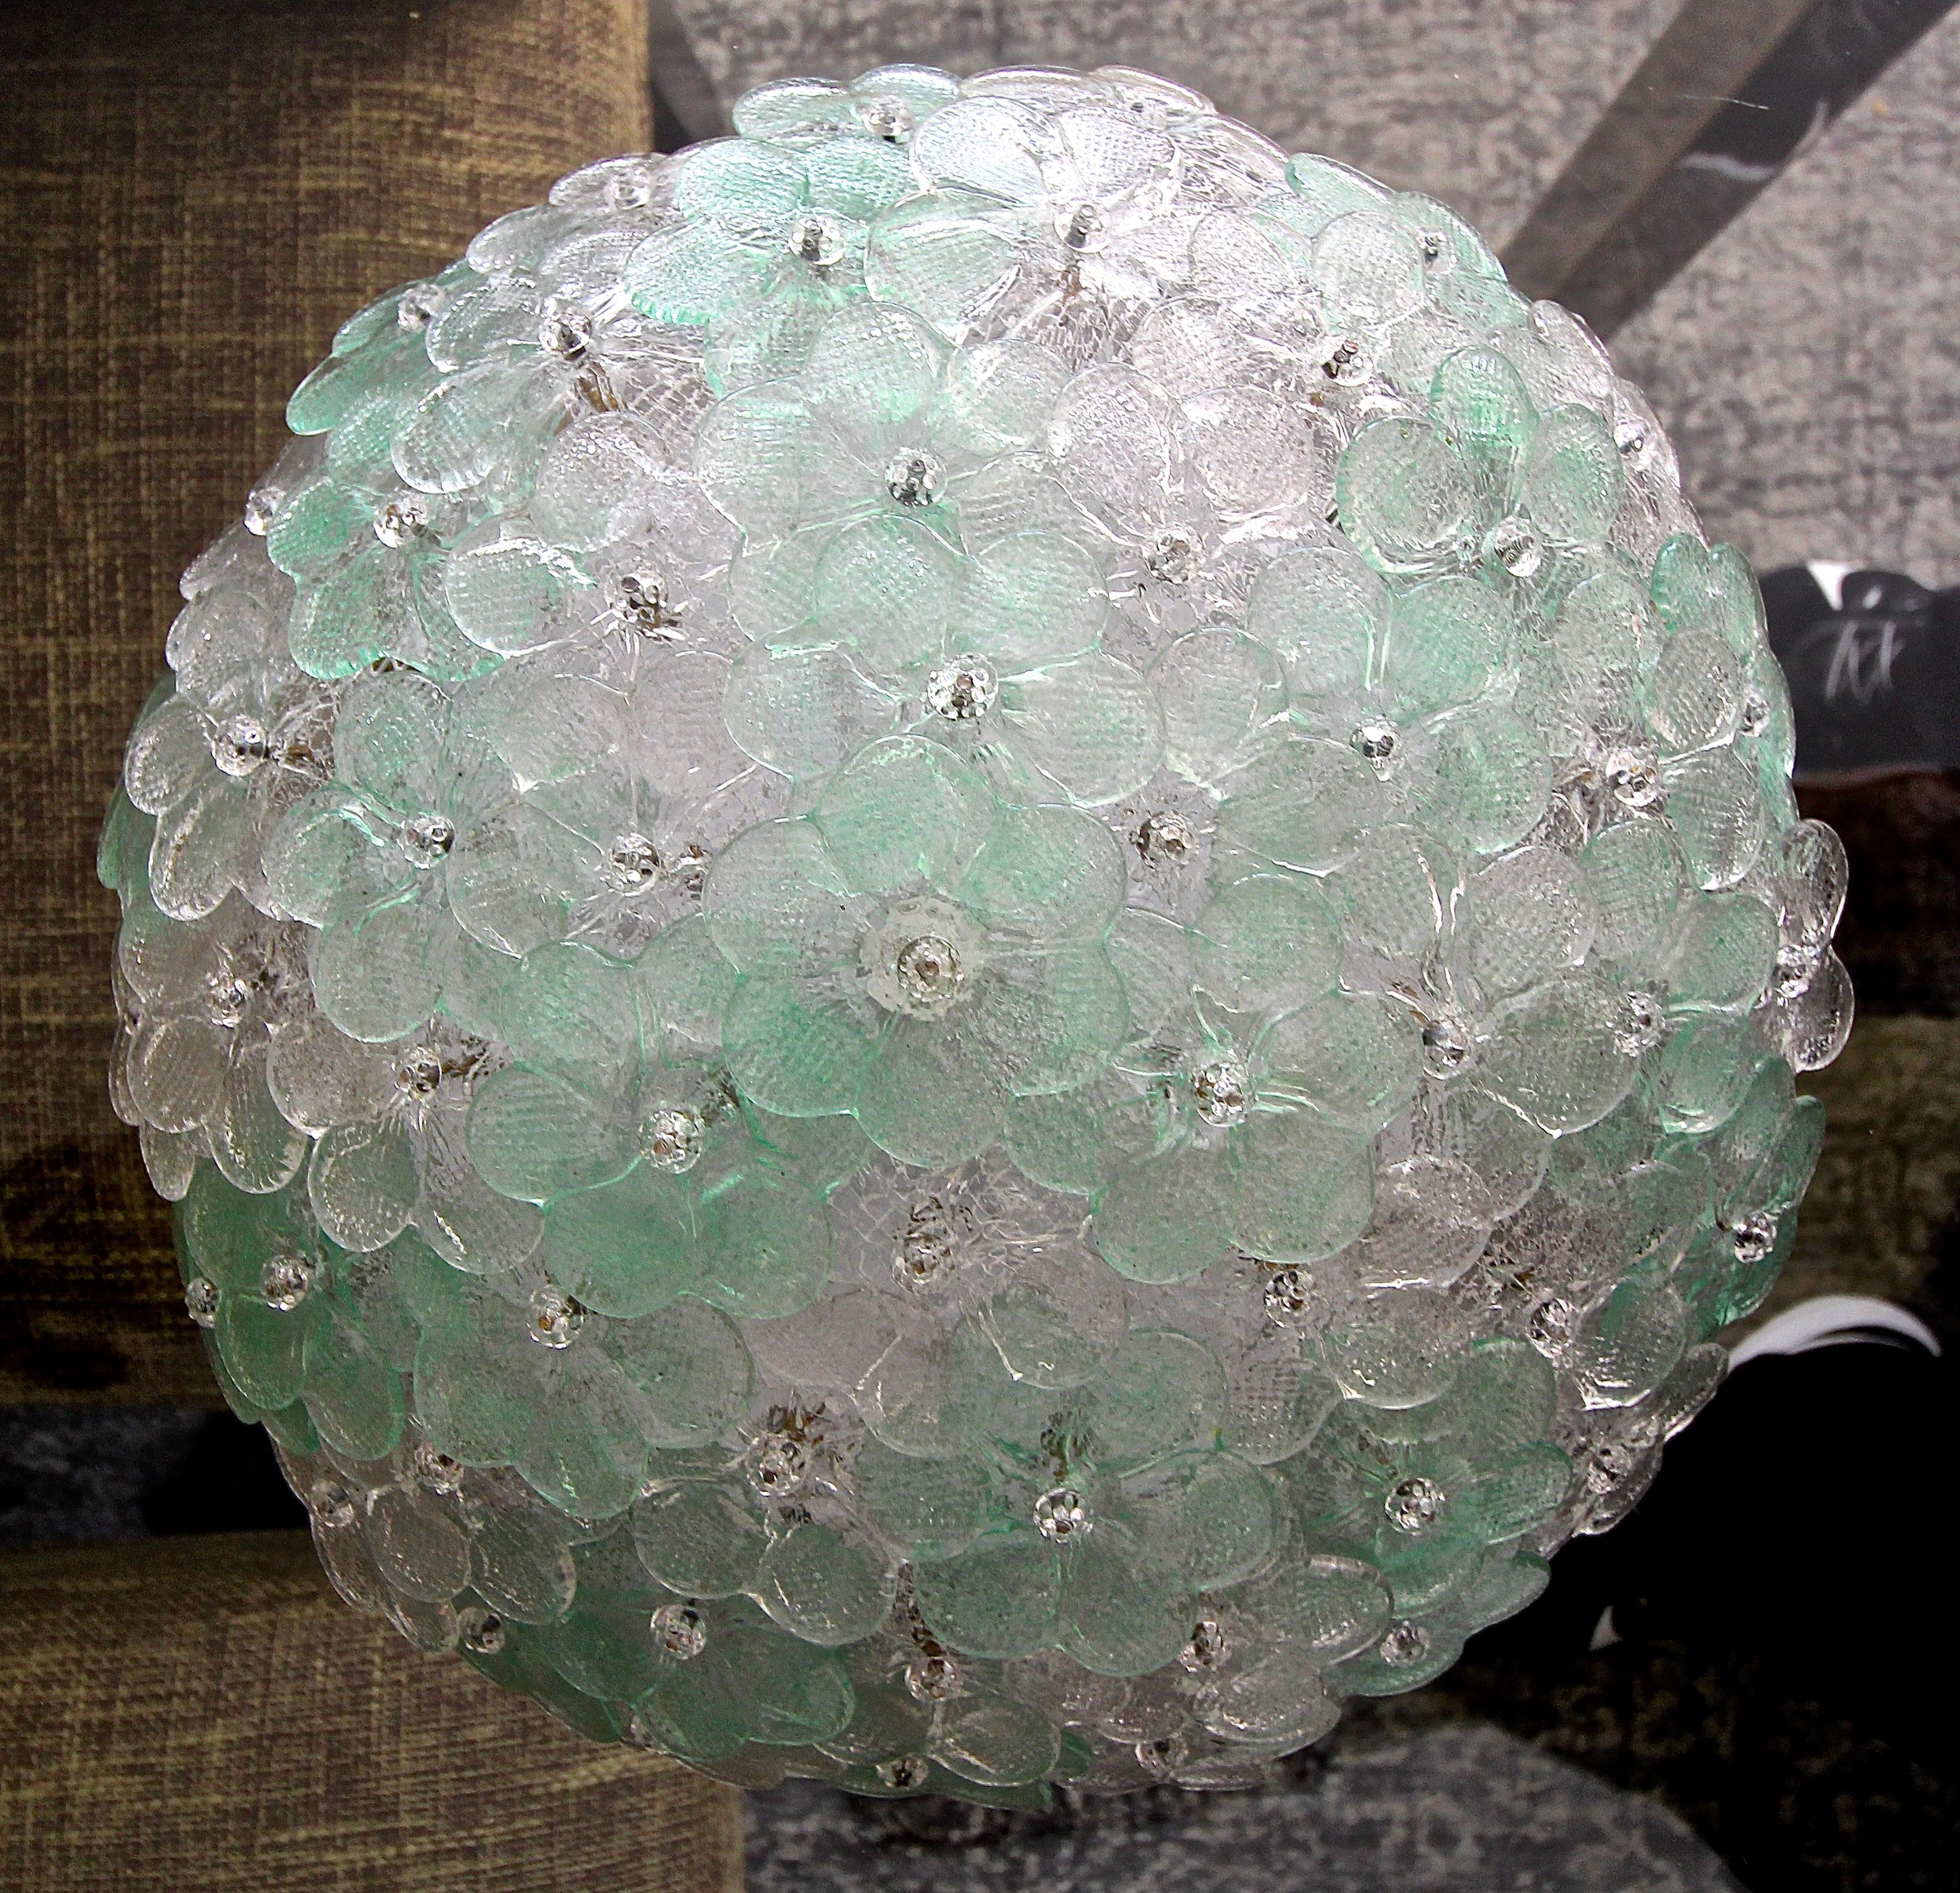 Murano floral motif ceiling flush mount ceiling light. Composed of hand blown glass flowers with alternating clear and green accents. Affixed to a white metal 3-light ceiling frame. Uses 3 candelabra base bulbs. Newly wired.